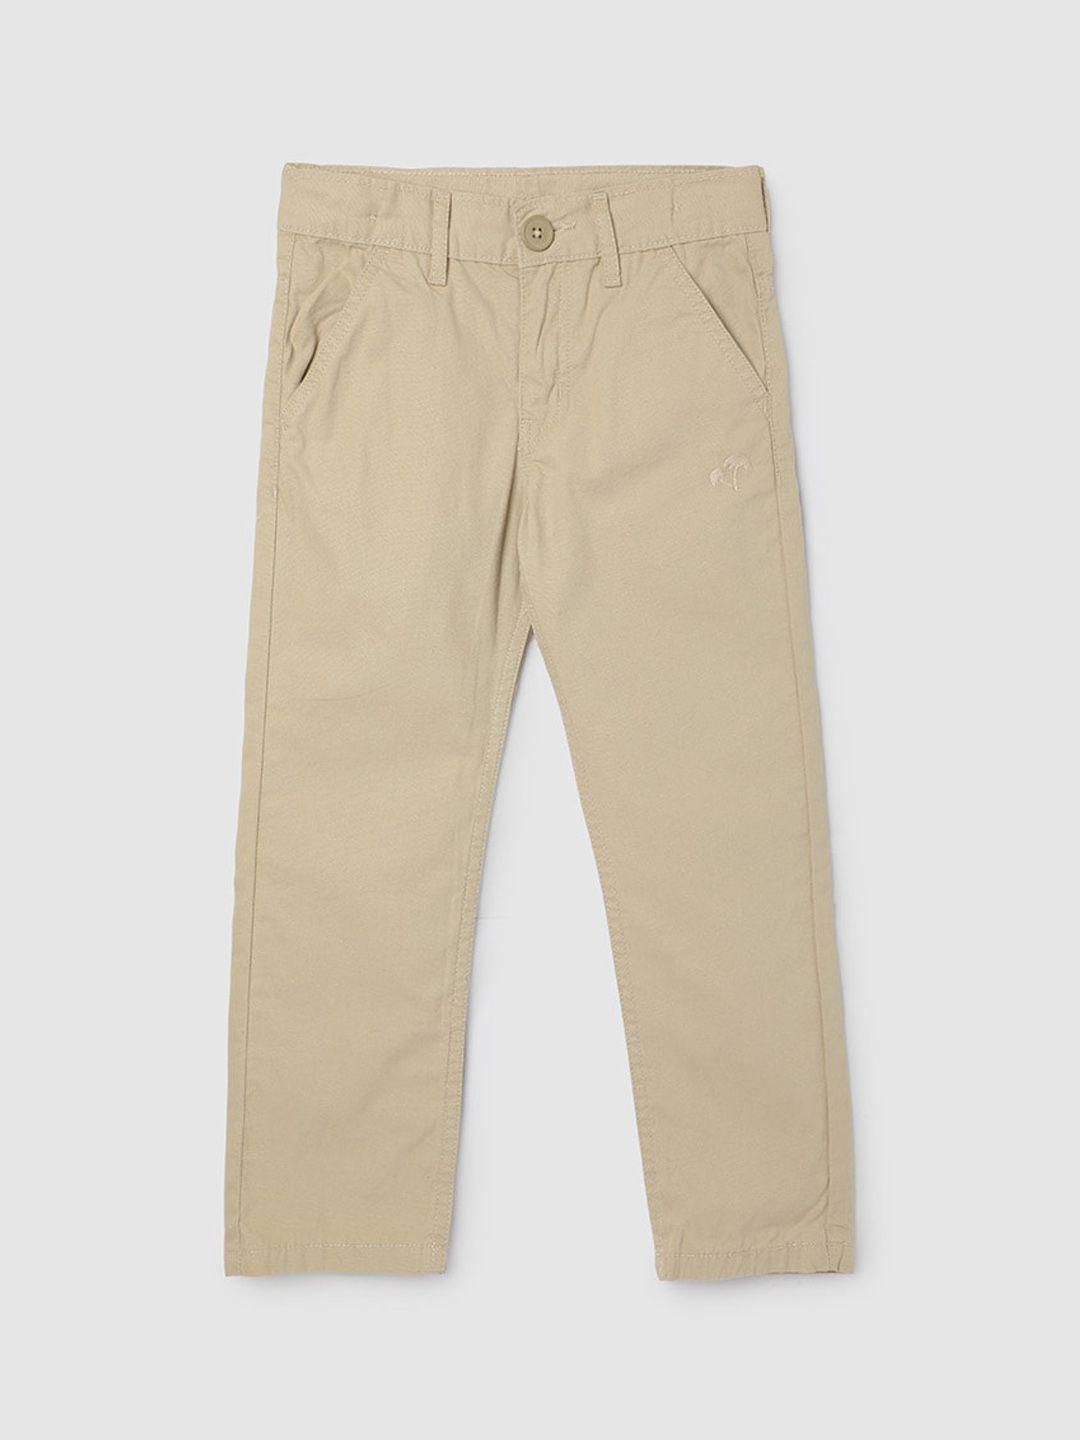 max-boys-regular-fit-pure-cotton-trousers